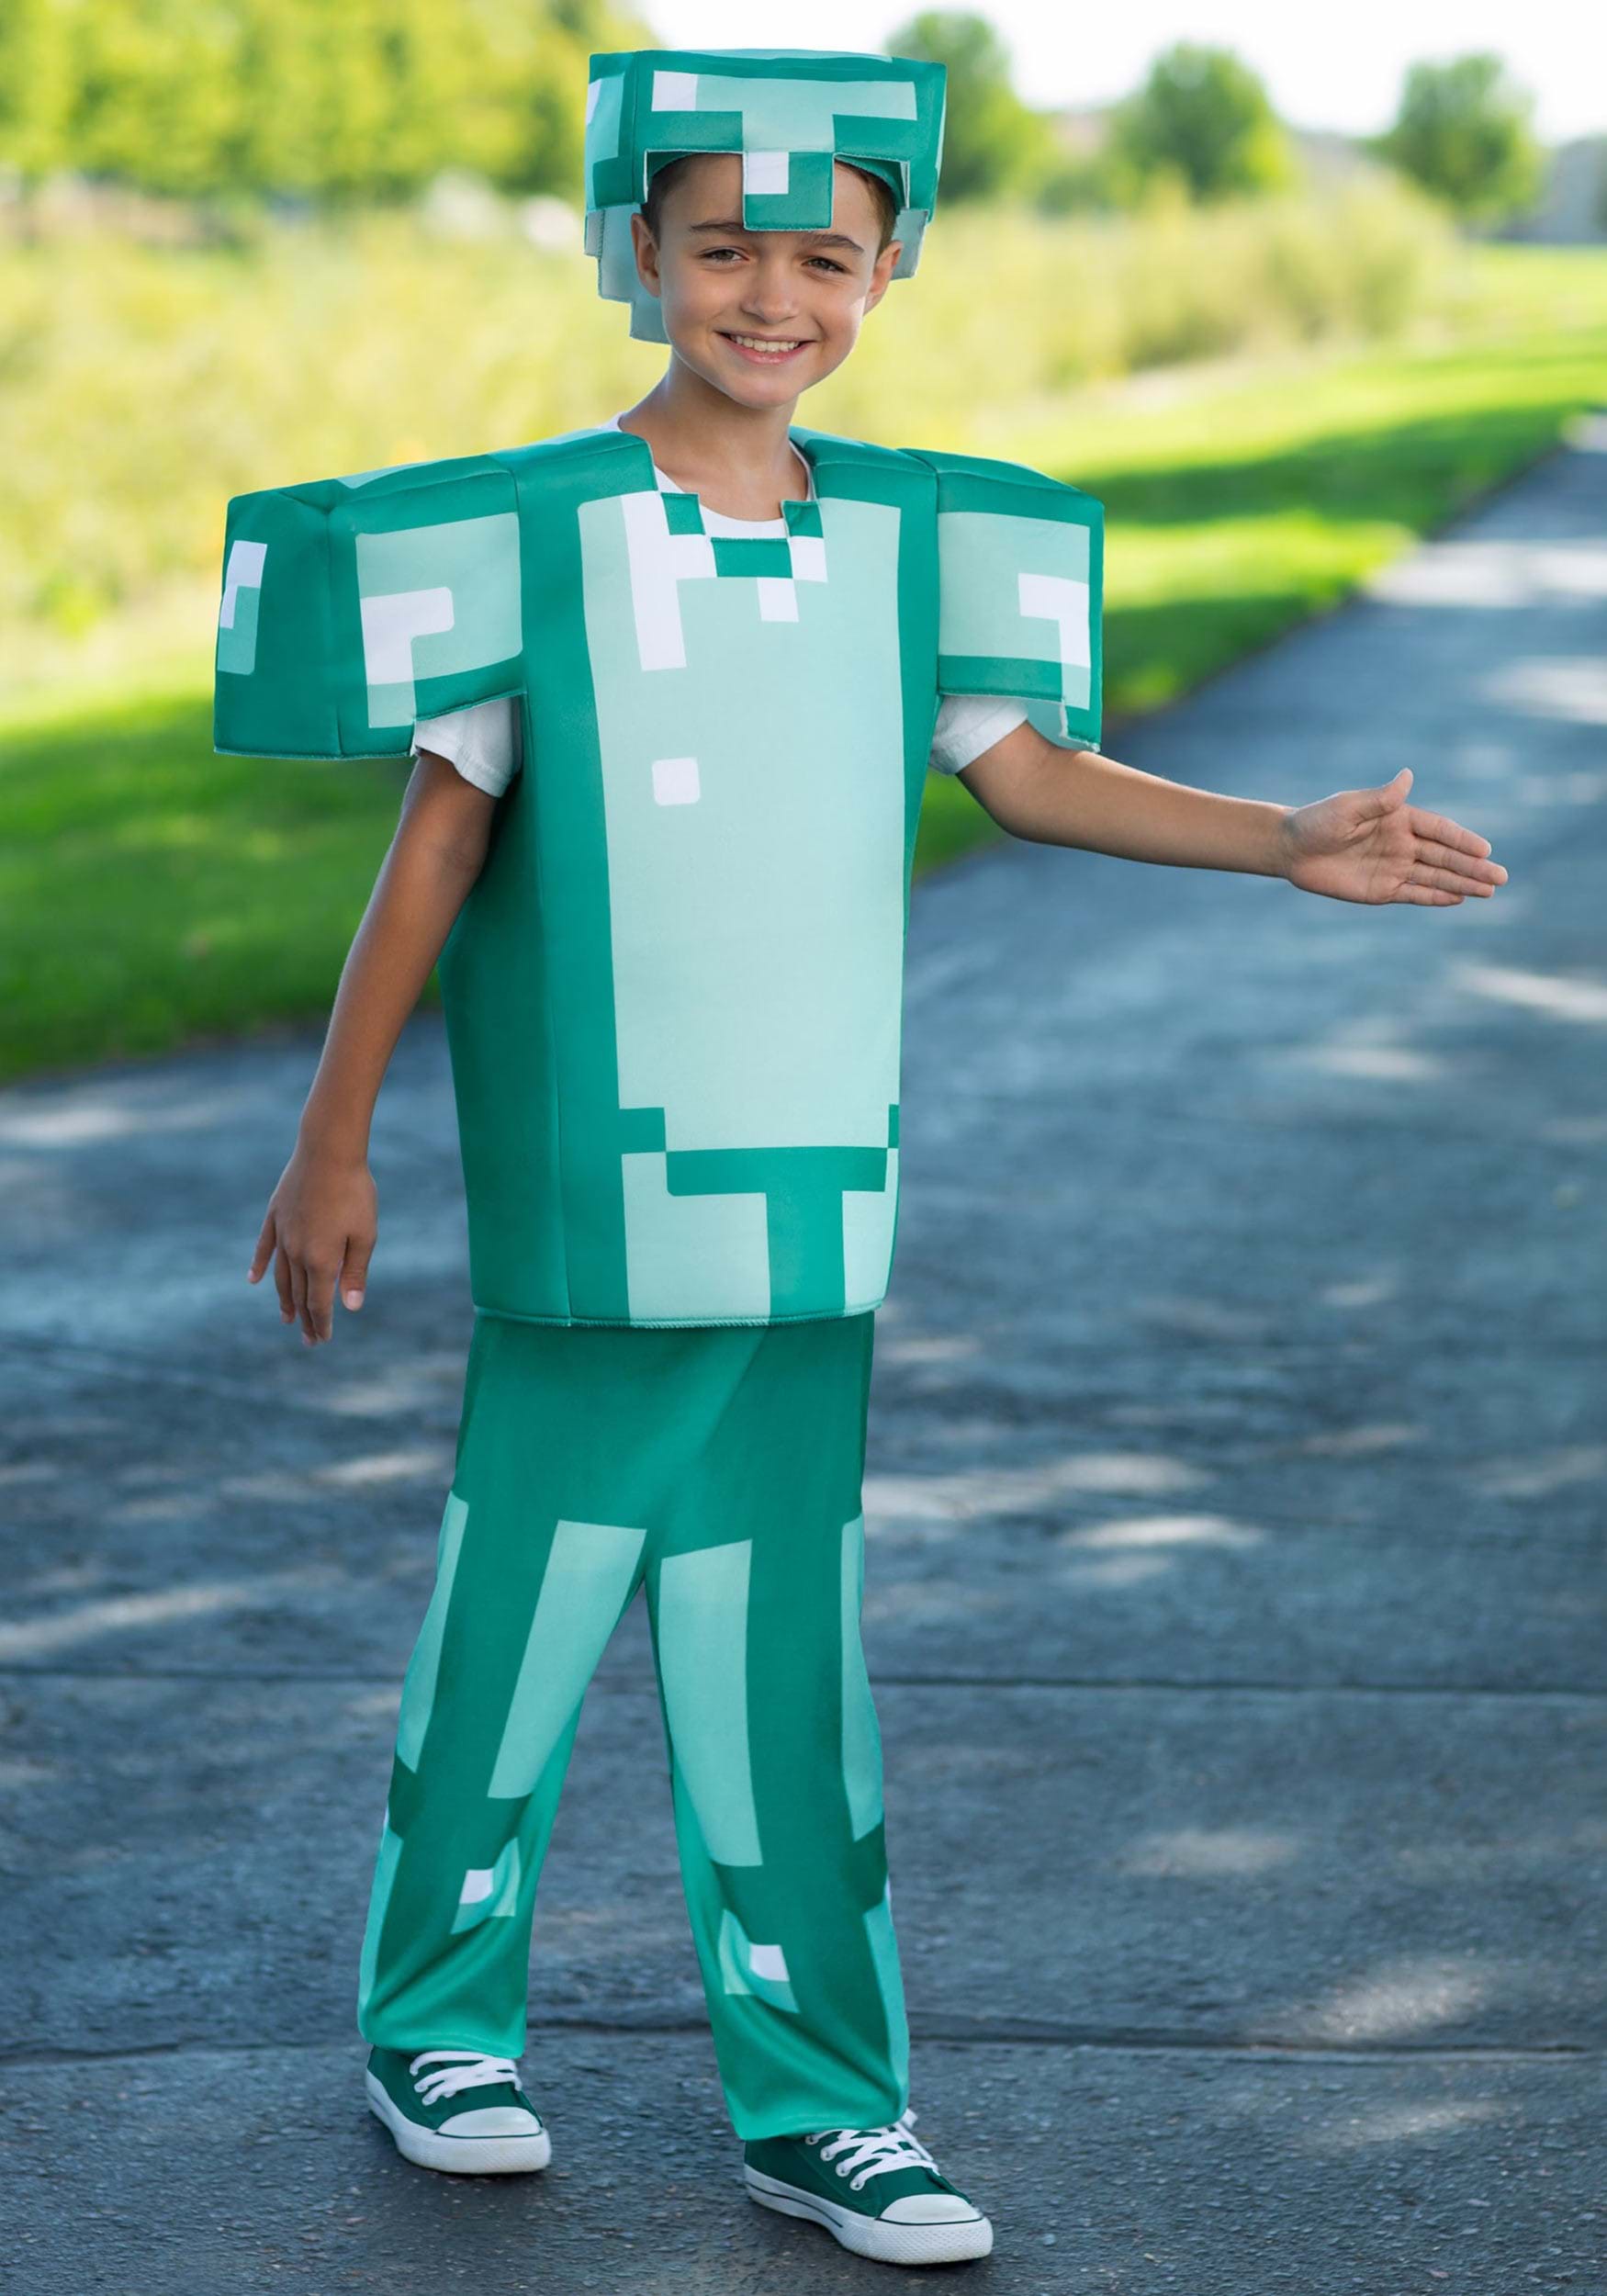 Deluxe Minecraft Armor Costume for Kids